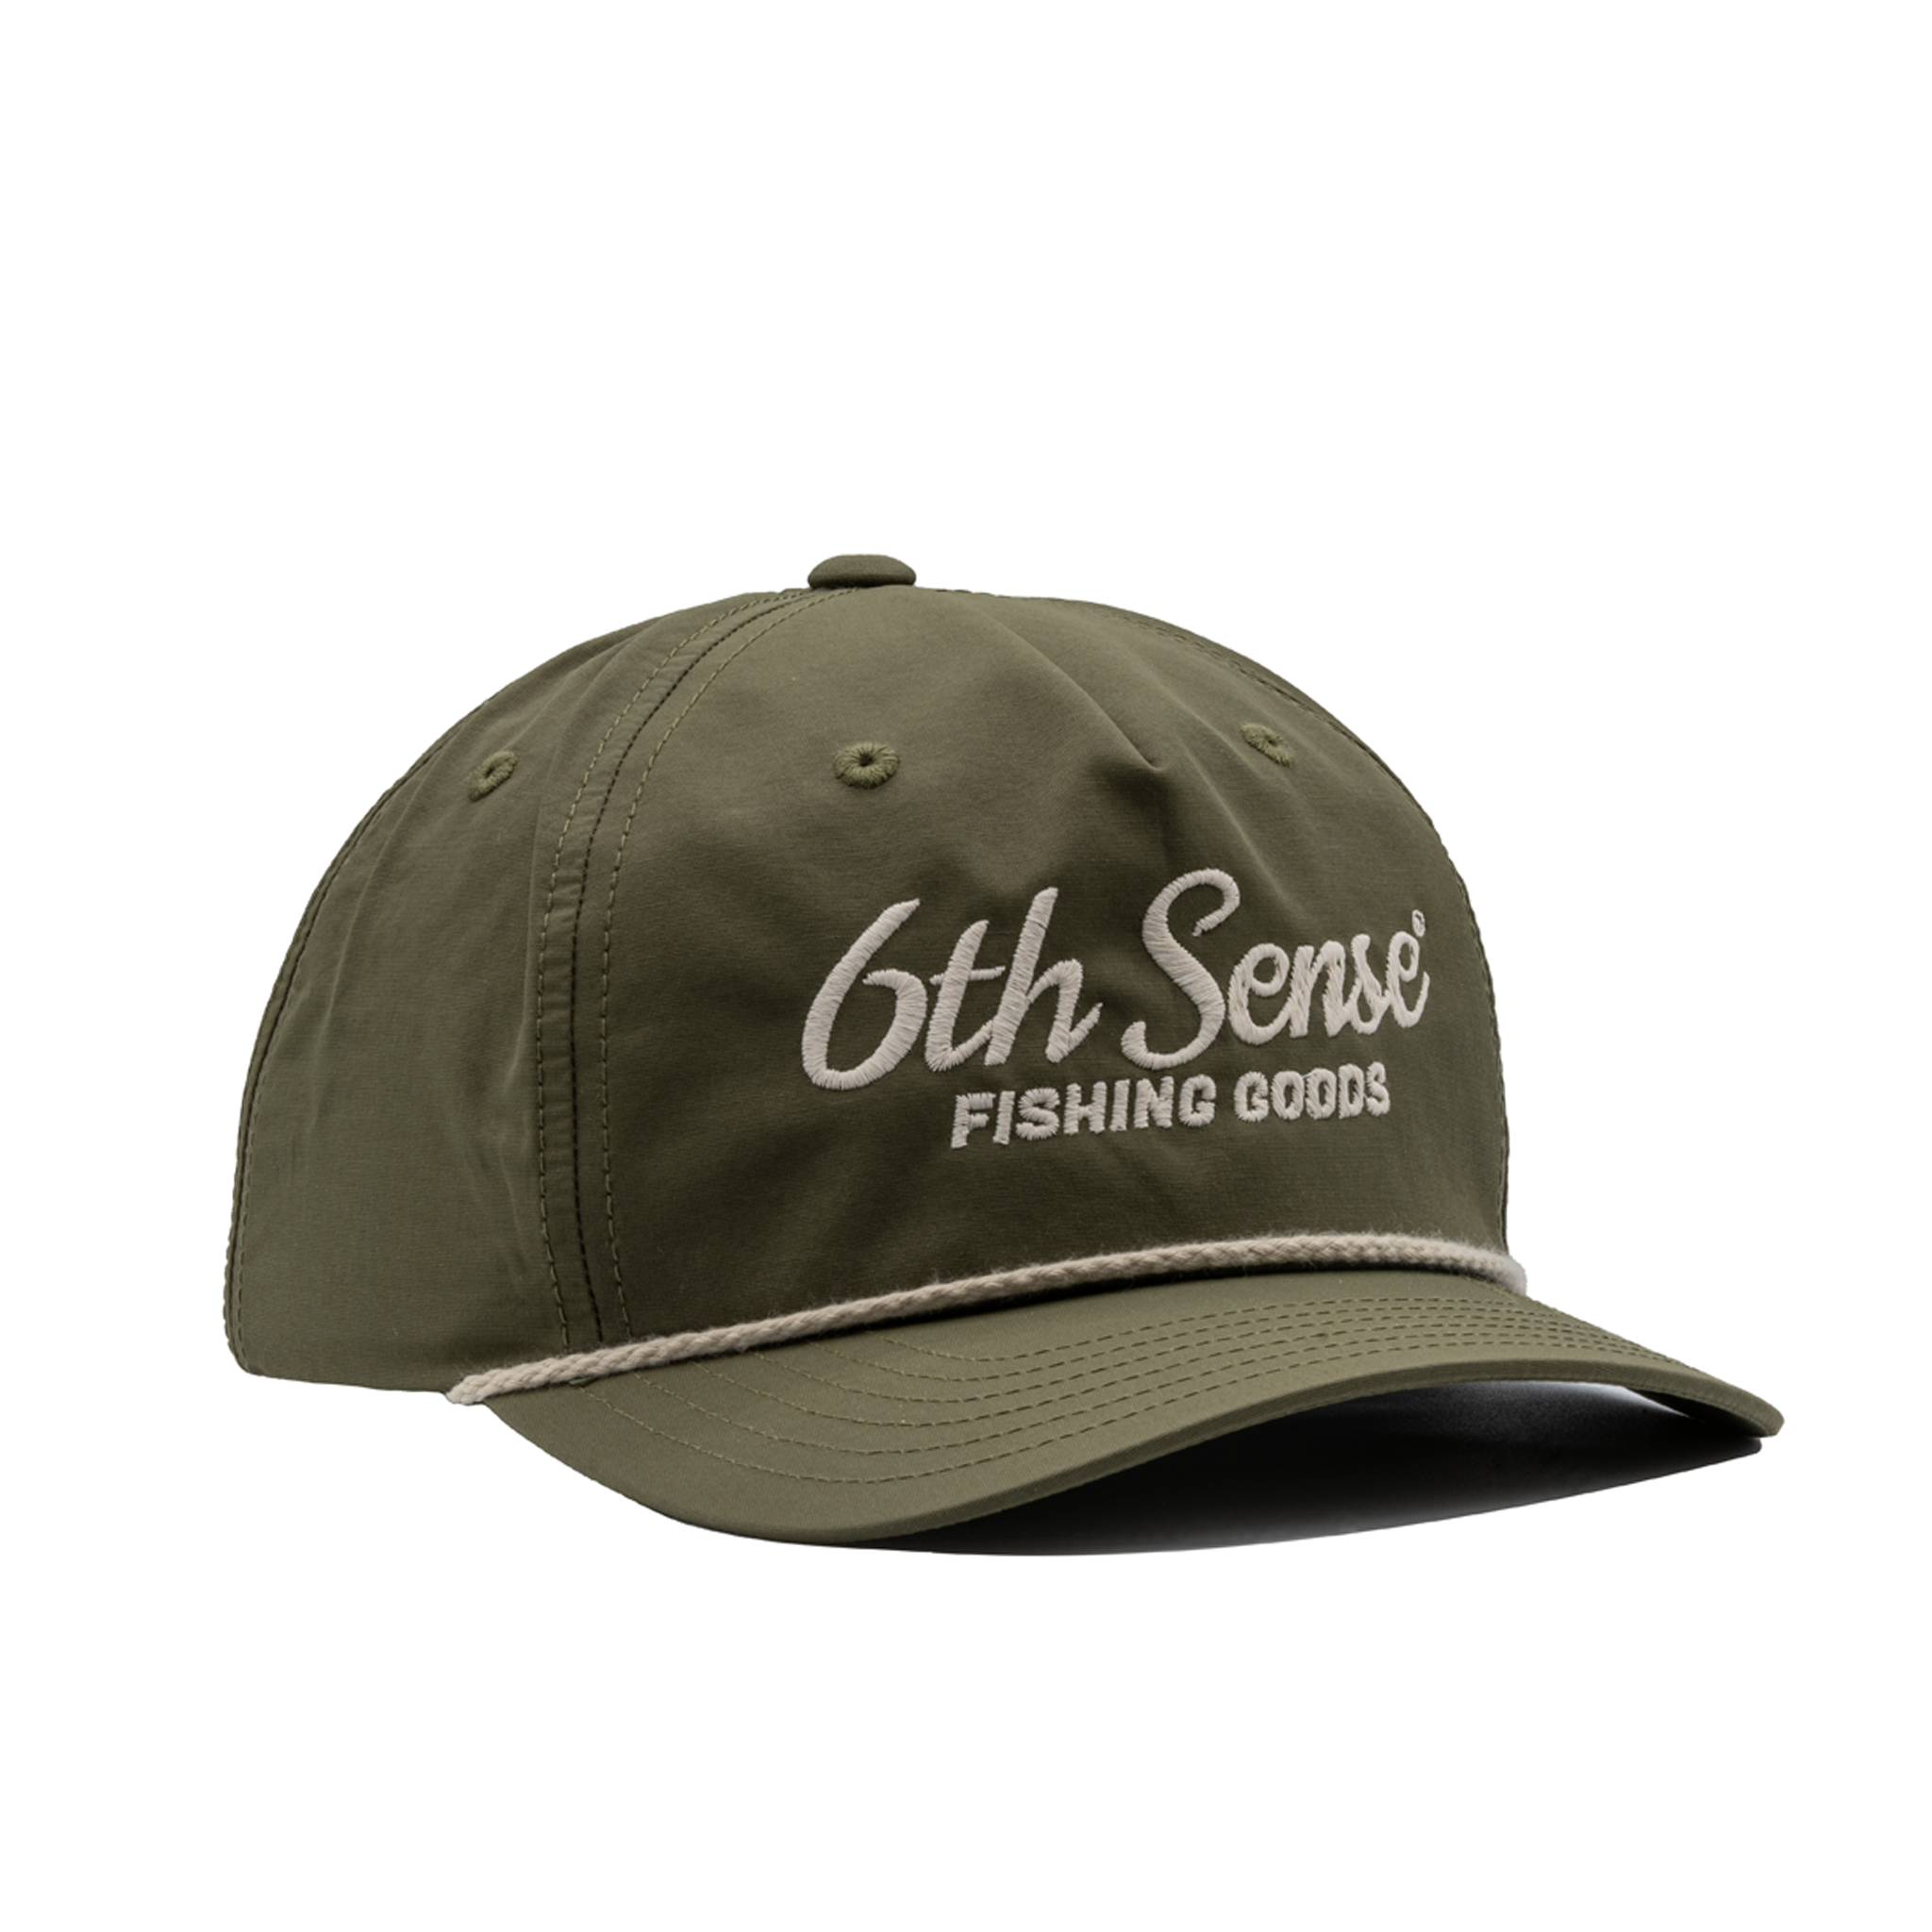 6th Sense Fishing - We've added a few new 'Rayburn' hats to the site. Be  sure and check them out before they're gone! . . . #6thsenselures #6thsense  #bassfishing #6thsensefishing #rayburn